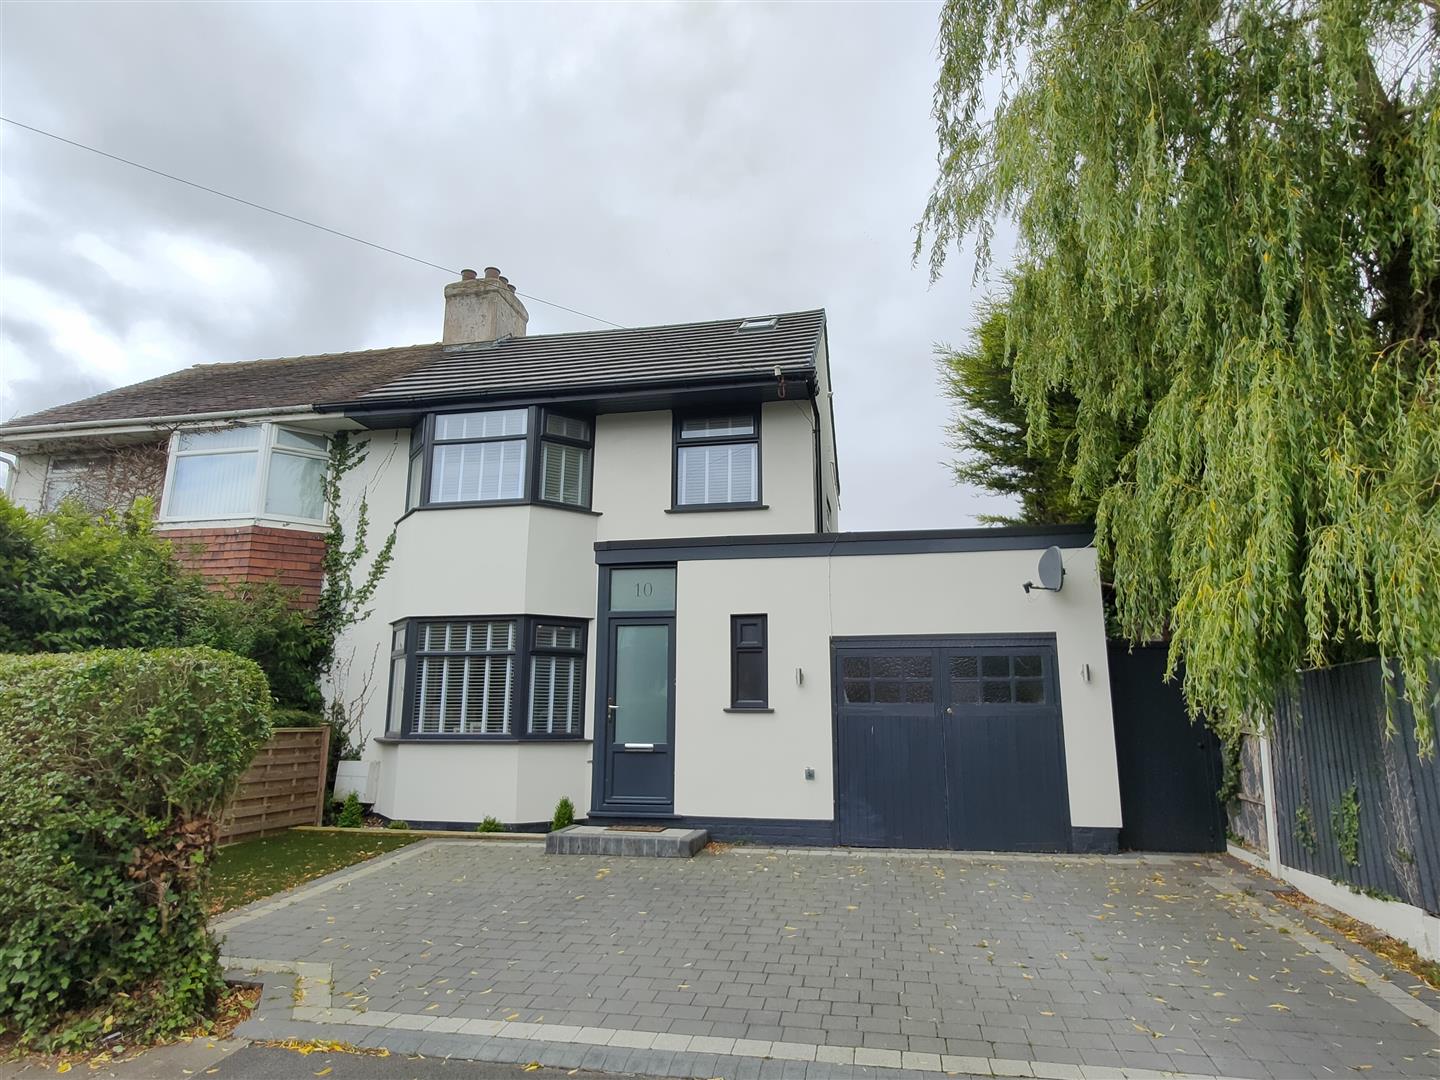 4 bedroom  House for Rental in Wirral